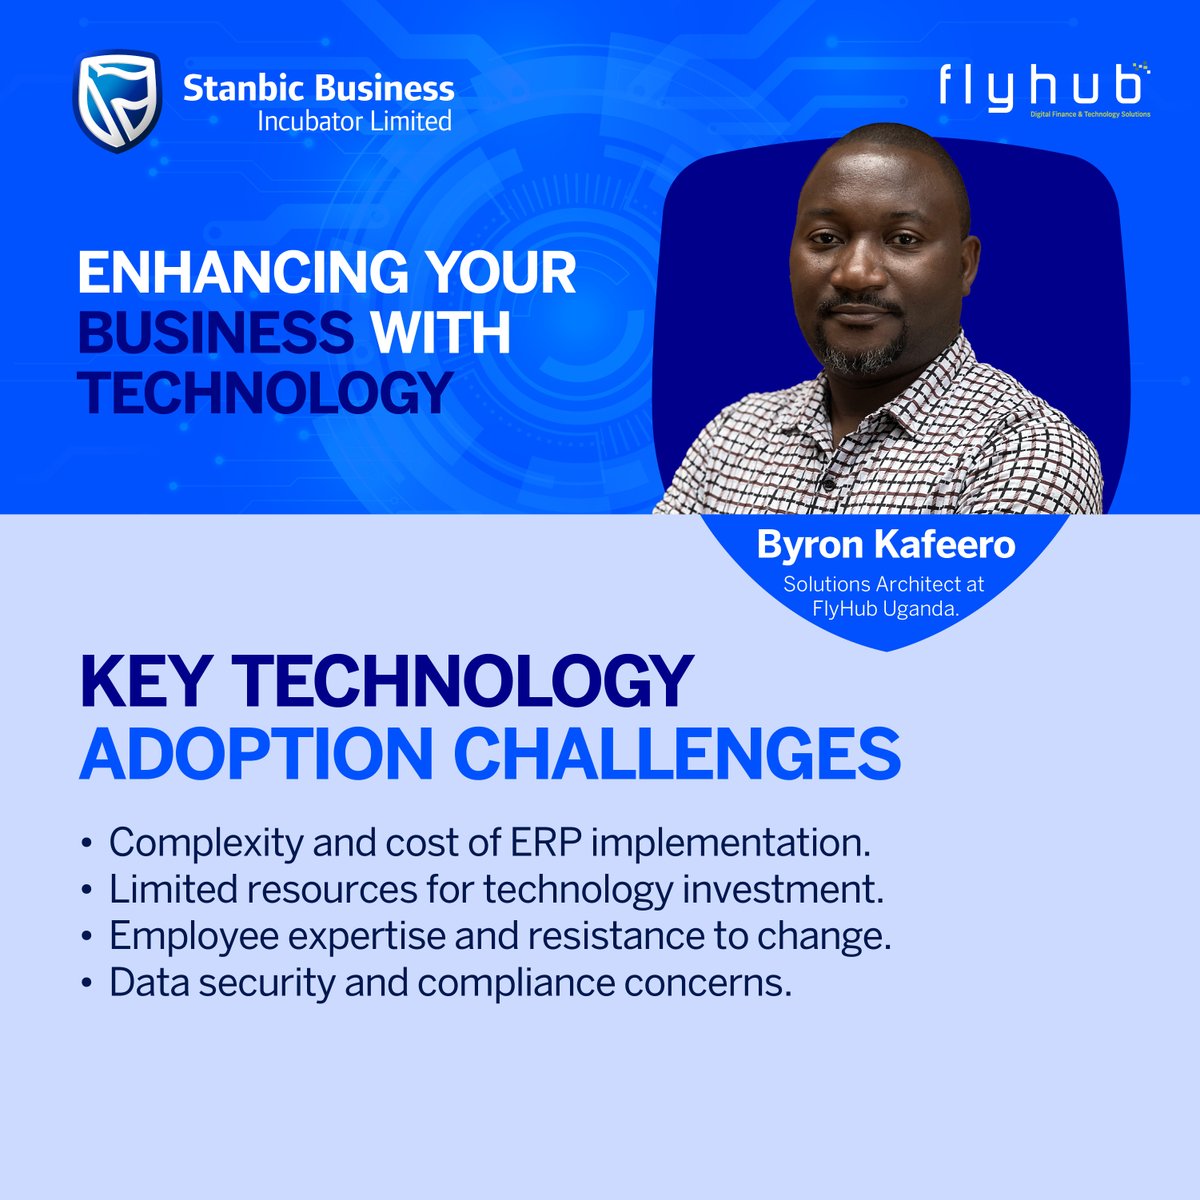 While technology is crucial for our businesses, there are certain challenges associated with its adoption. #StanbicIncubatorMasterclass